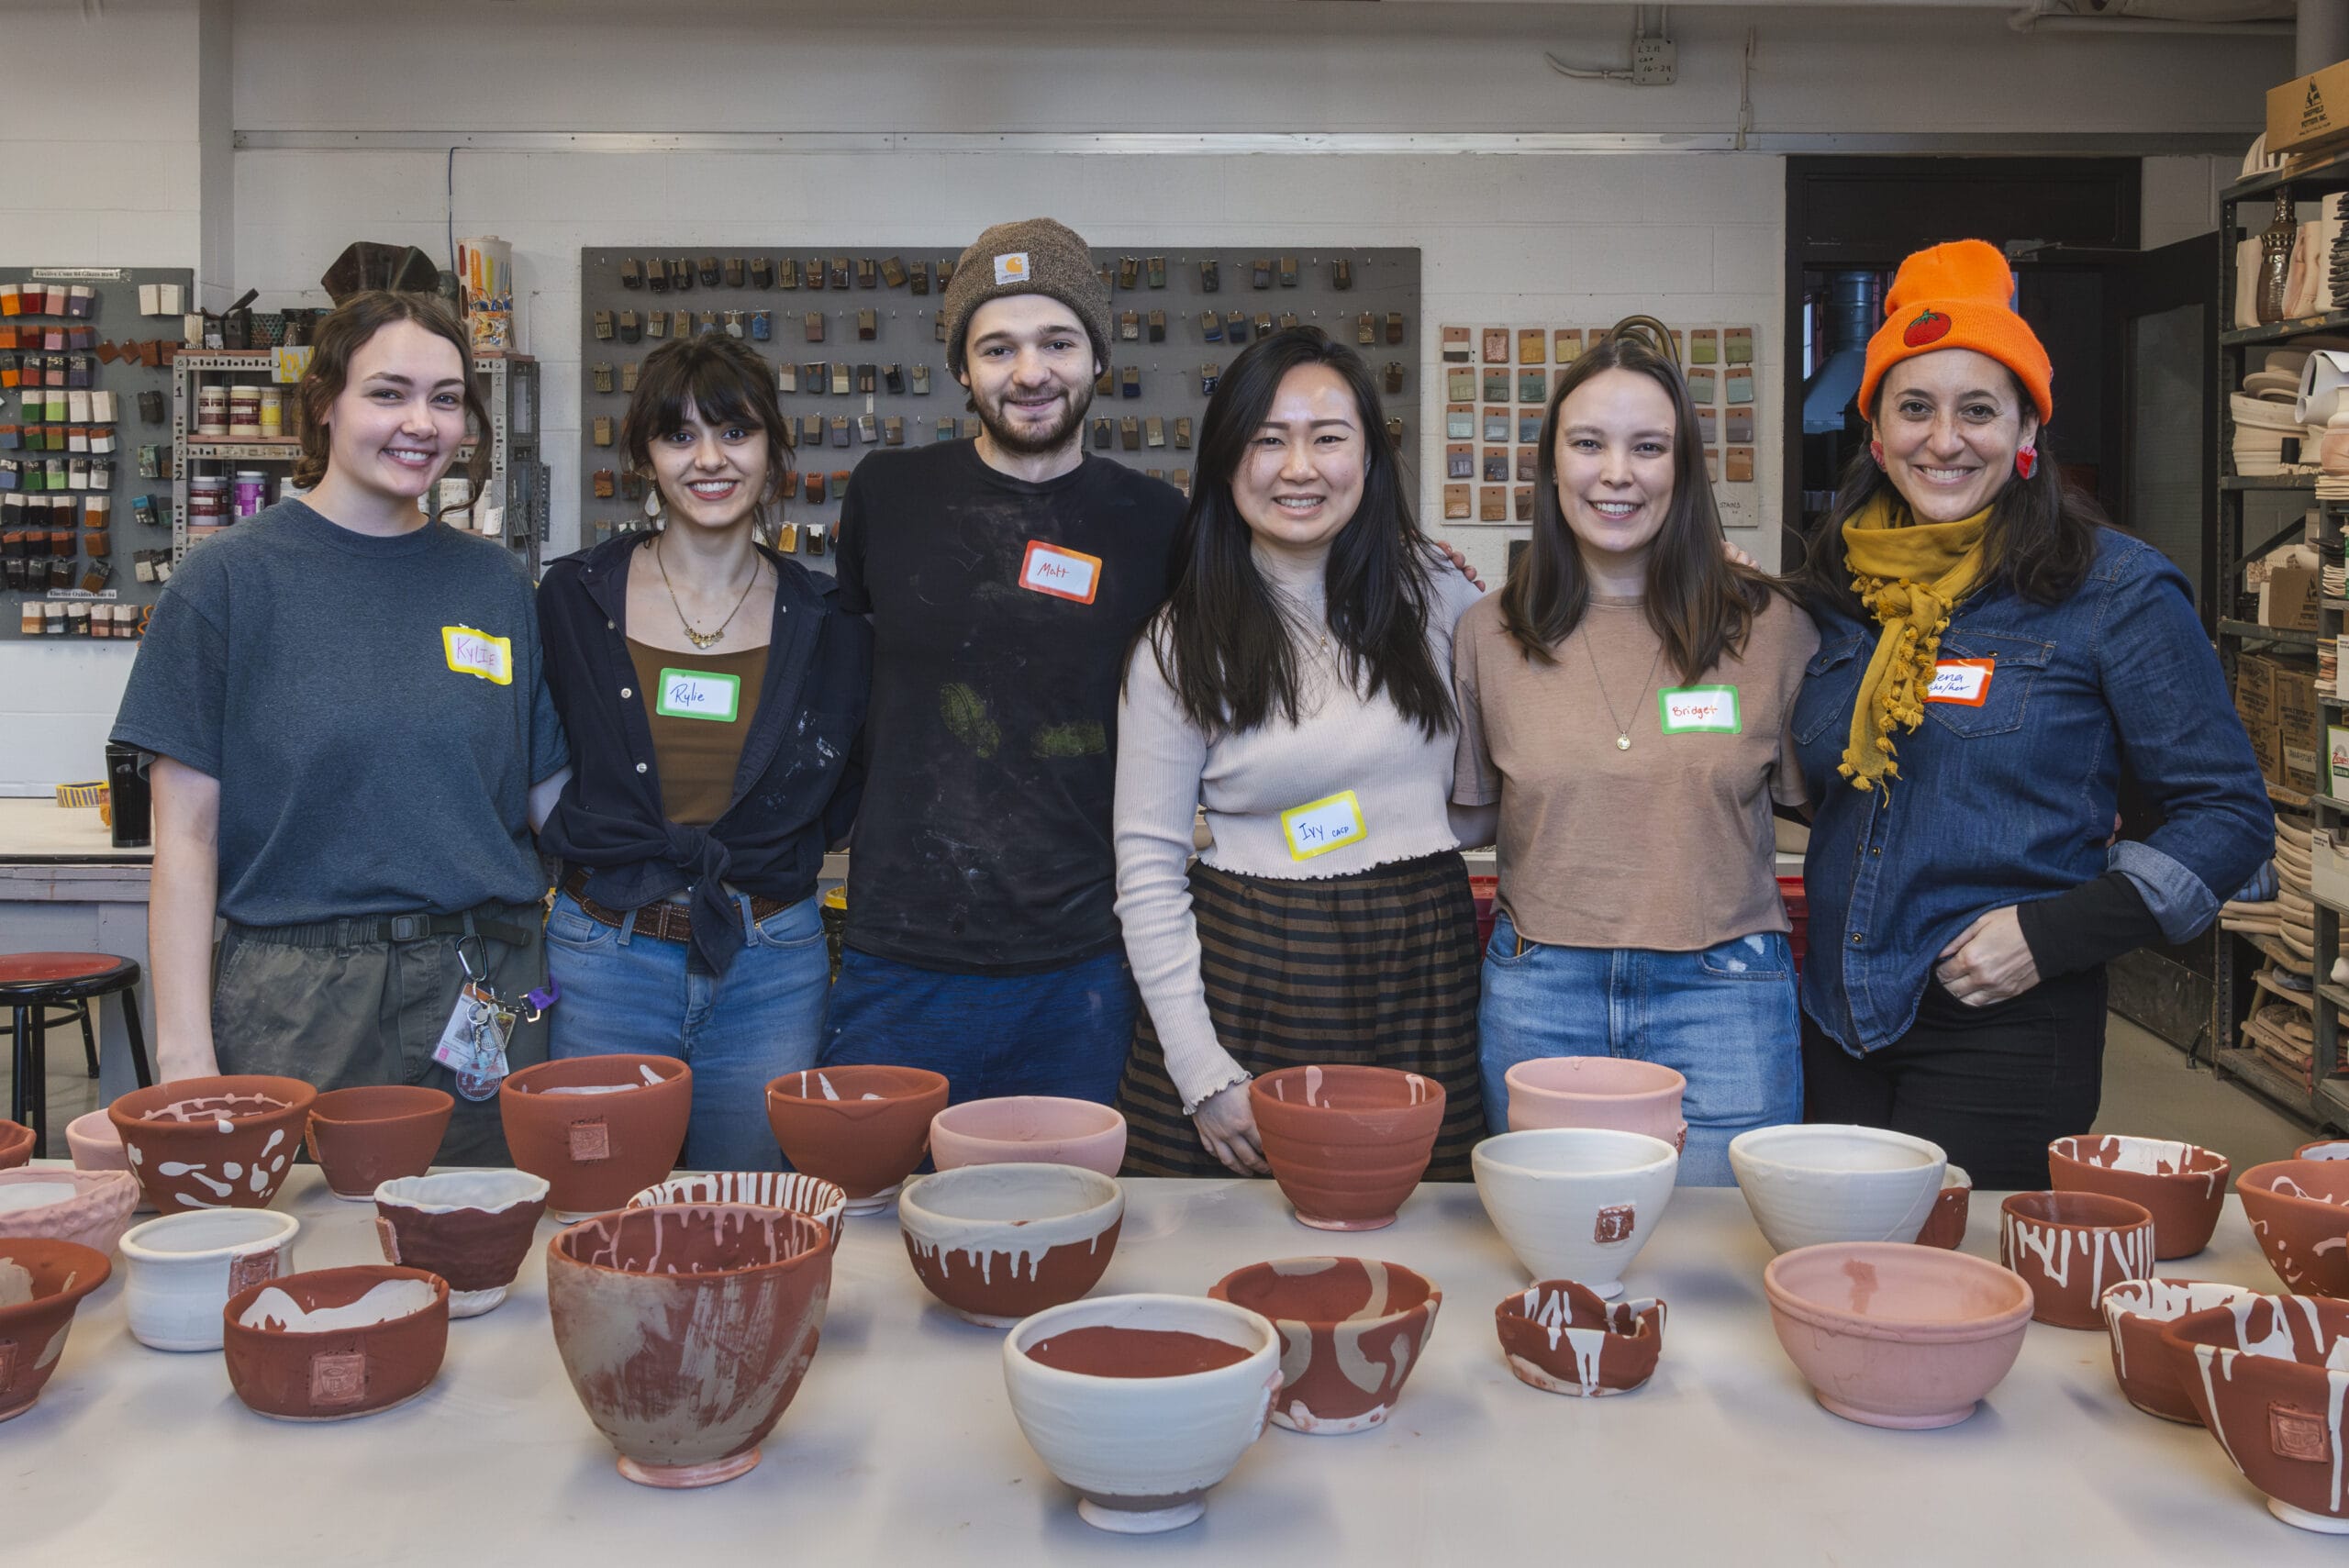 Students and staff line up smiling behind a table of freshly glazed ceramic bowls.